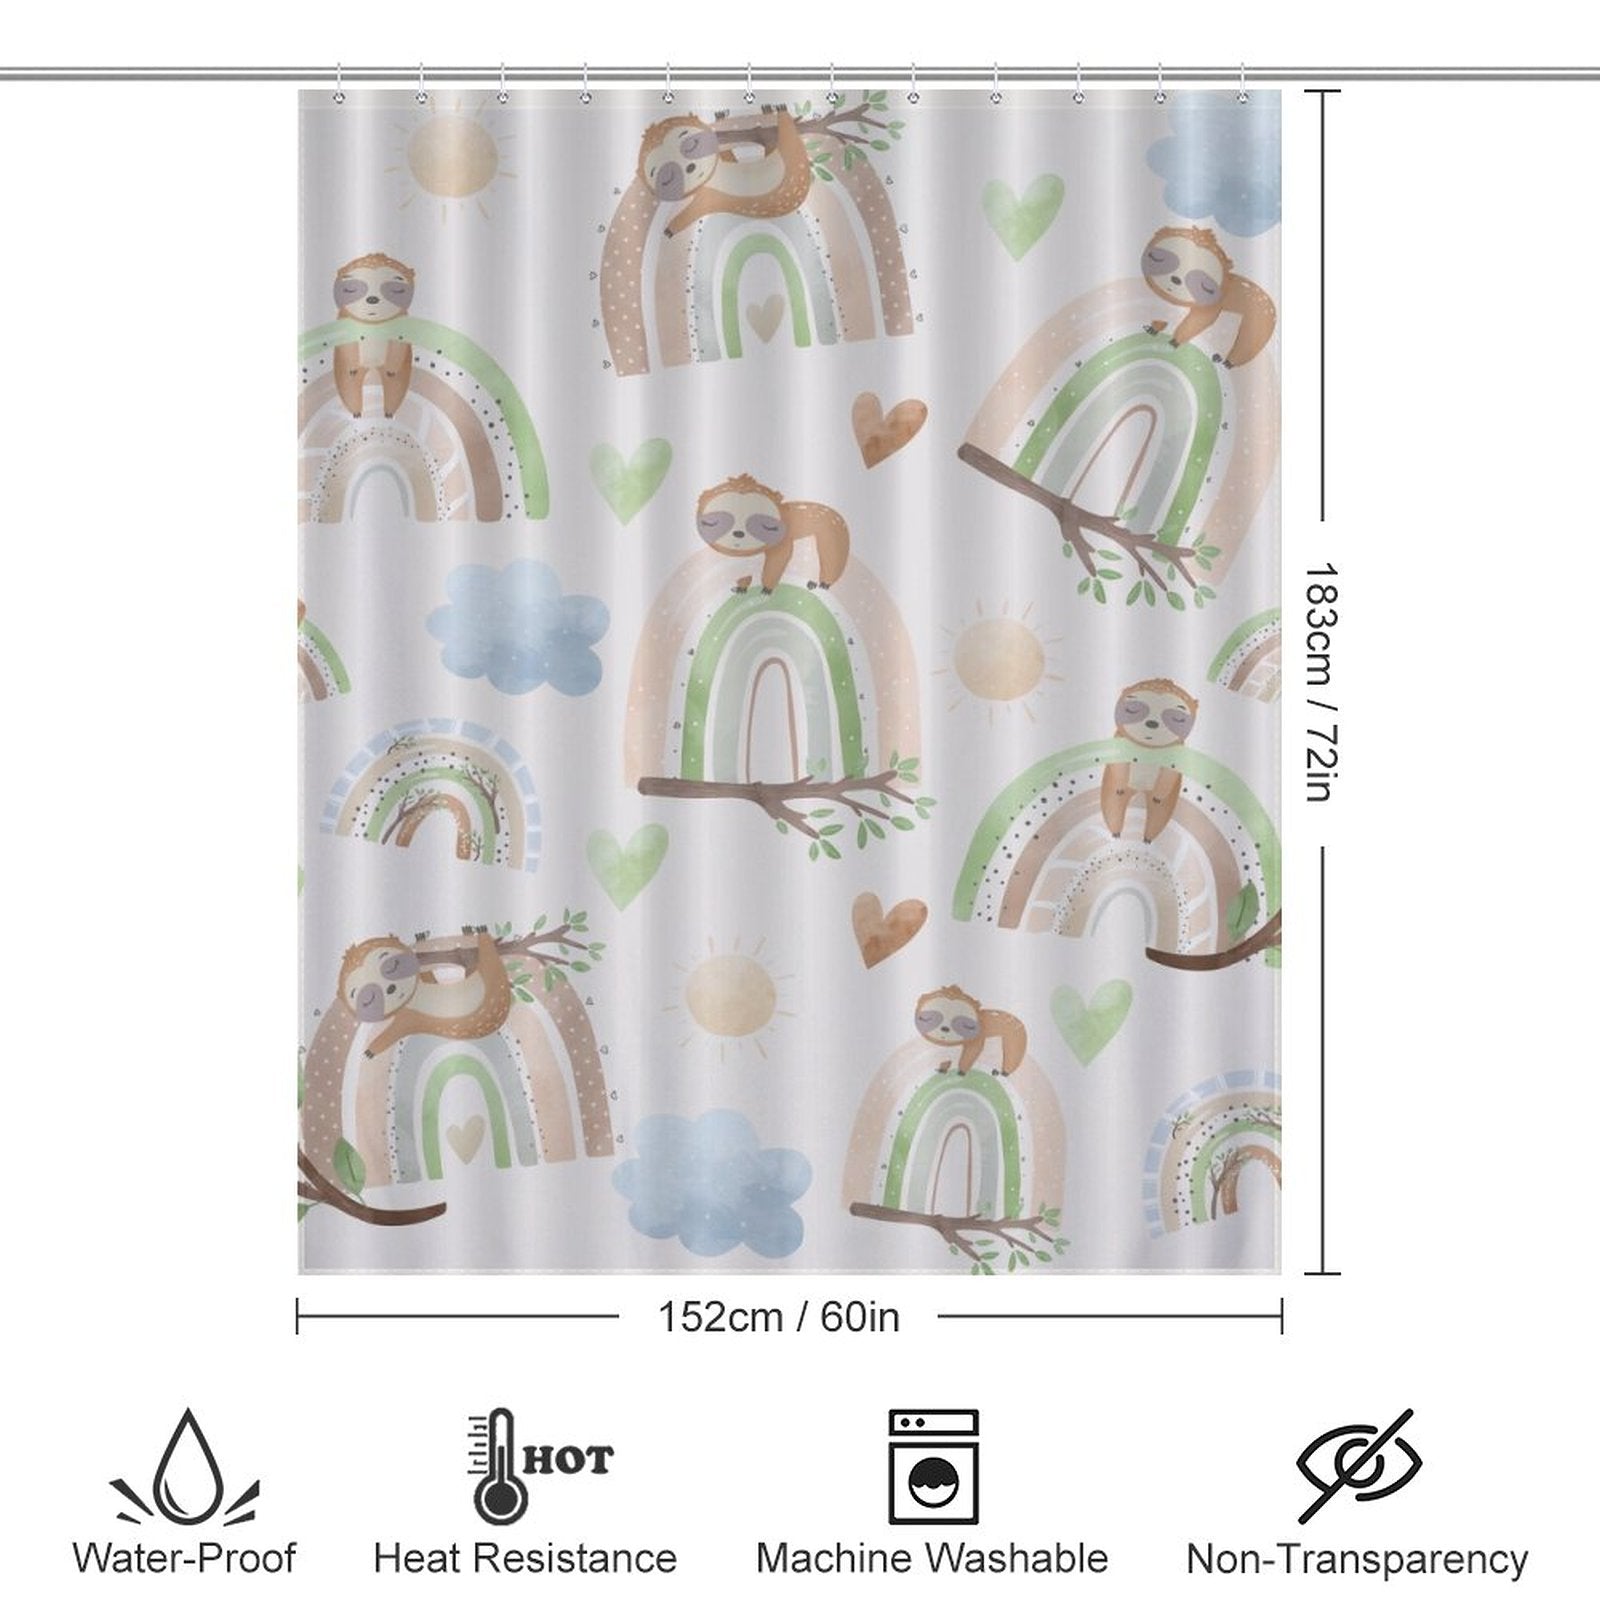 A Sloth Rainbow Shower Curtain-Cottoncat from Cotton Cat, depicting sloths and rainbows, creates a calming oasis.